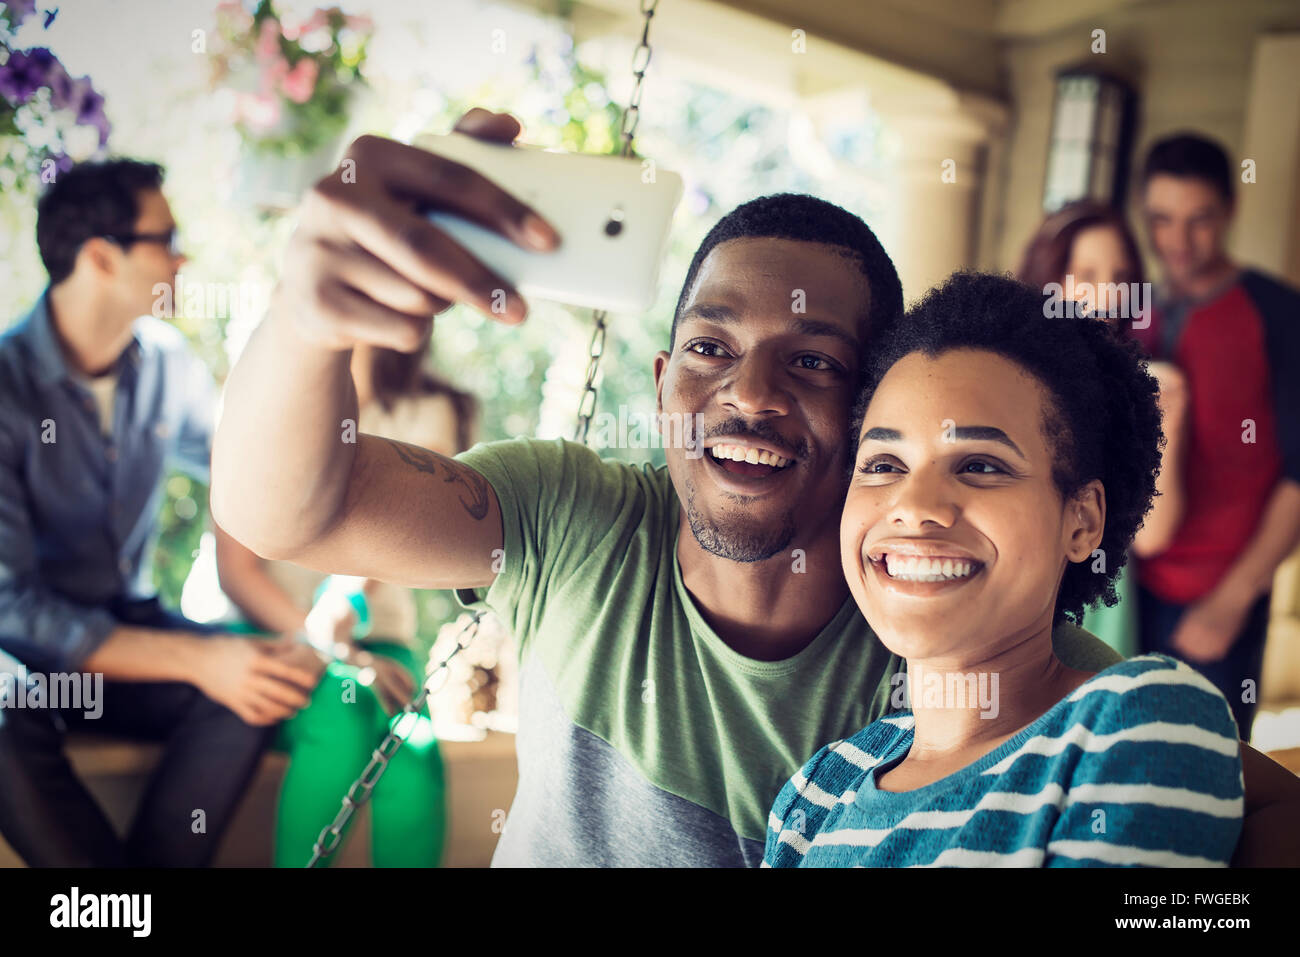 A group of friends, men and women at a house party. A couple taking a selfie. Stock Photo